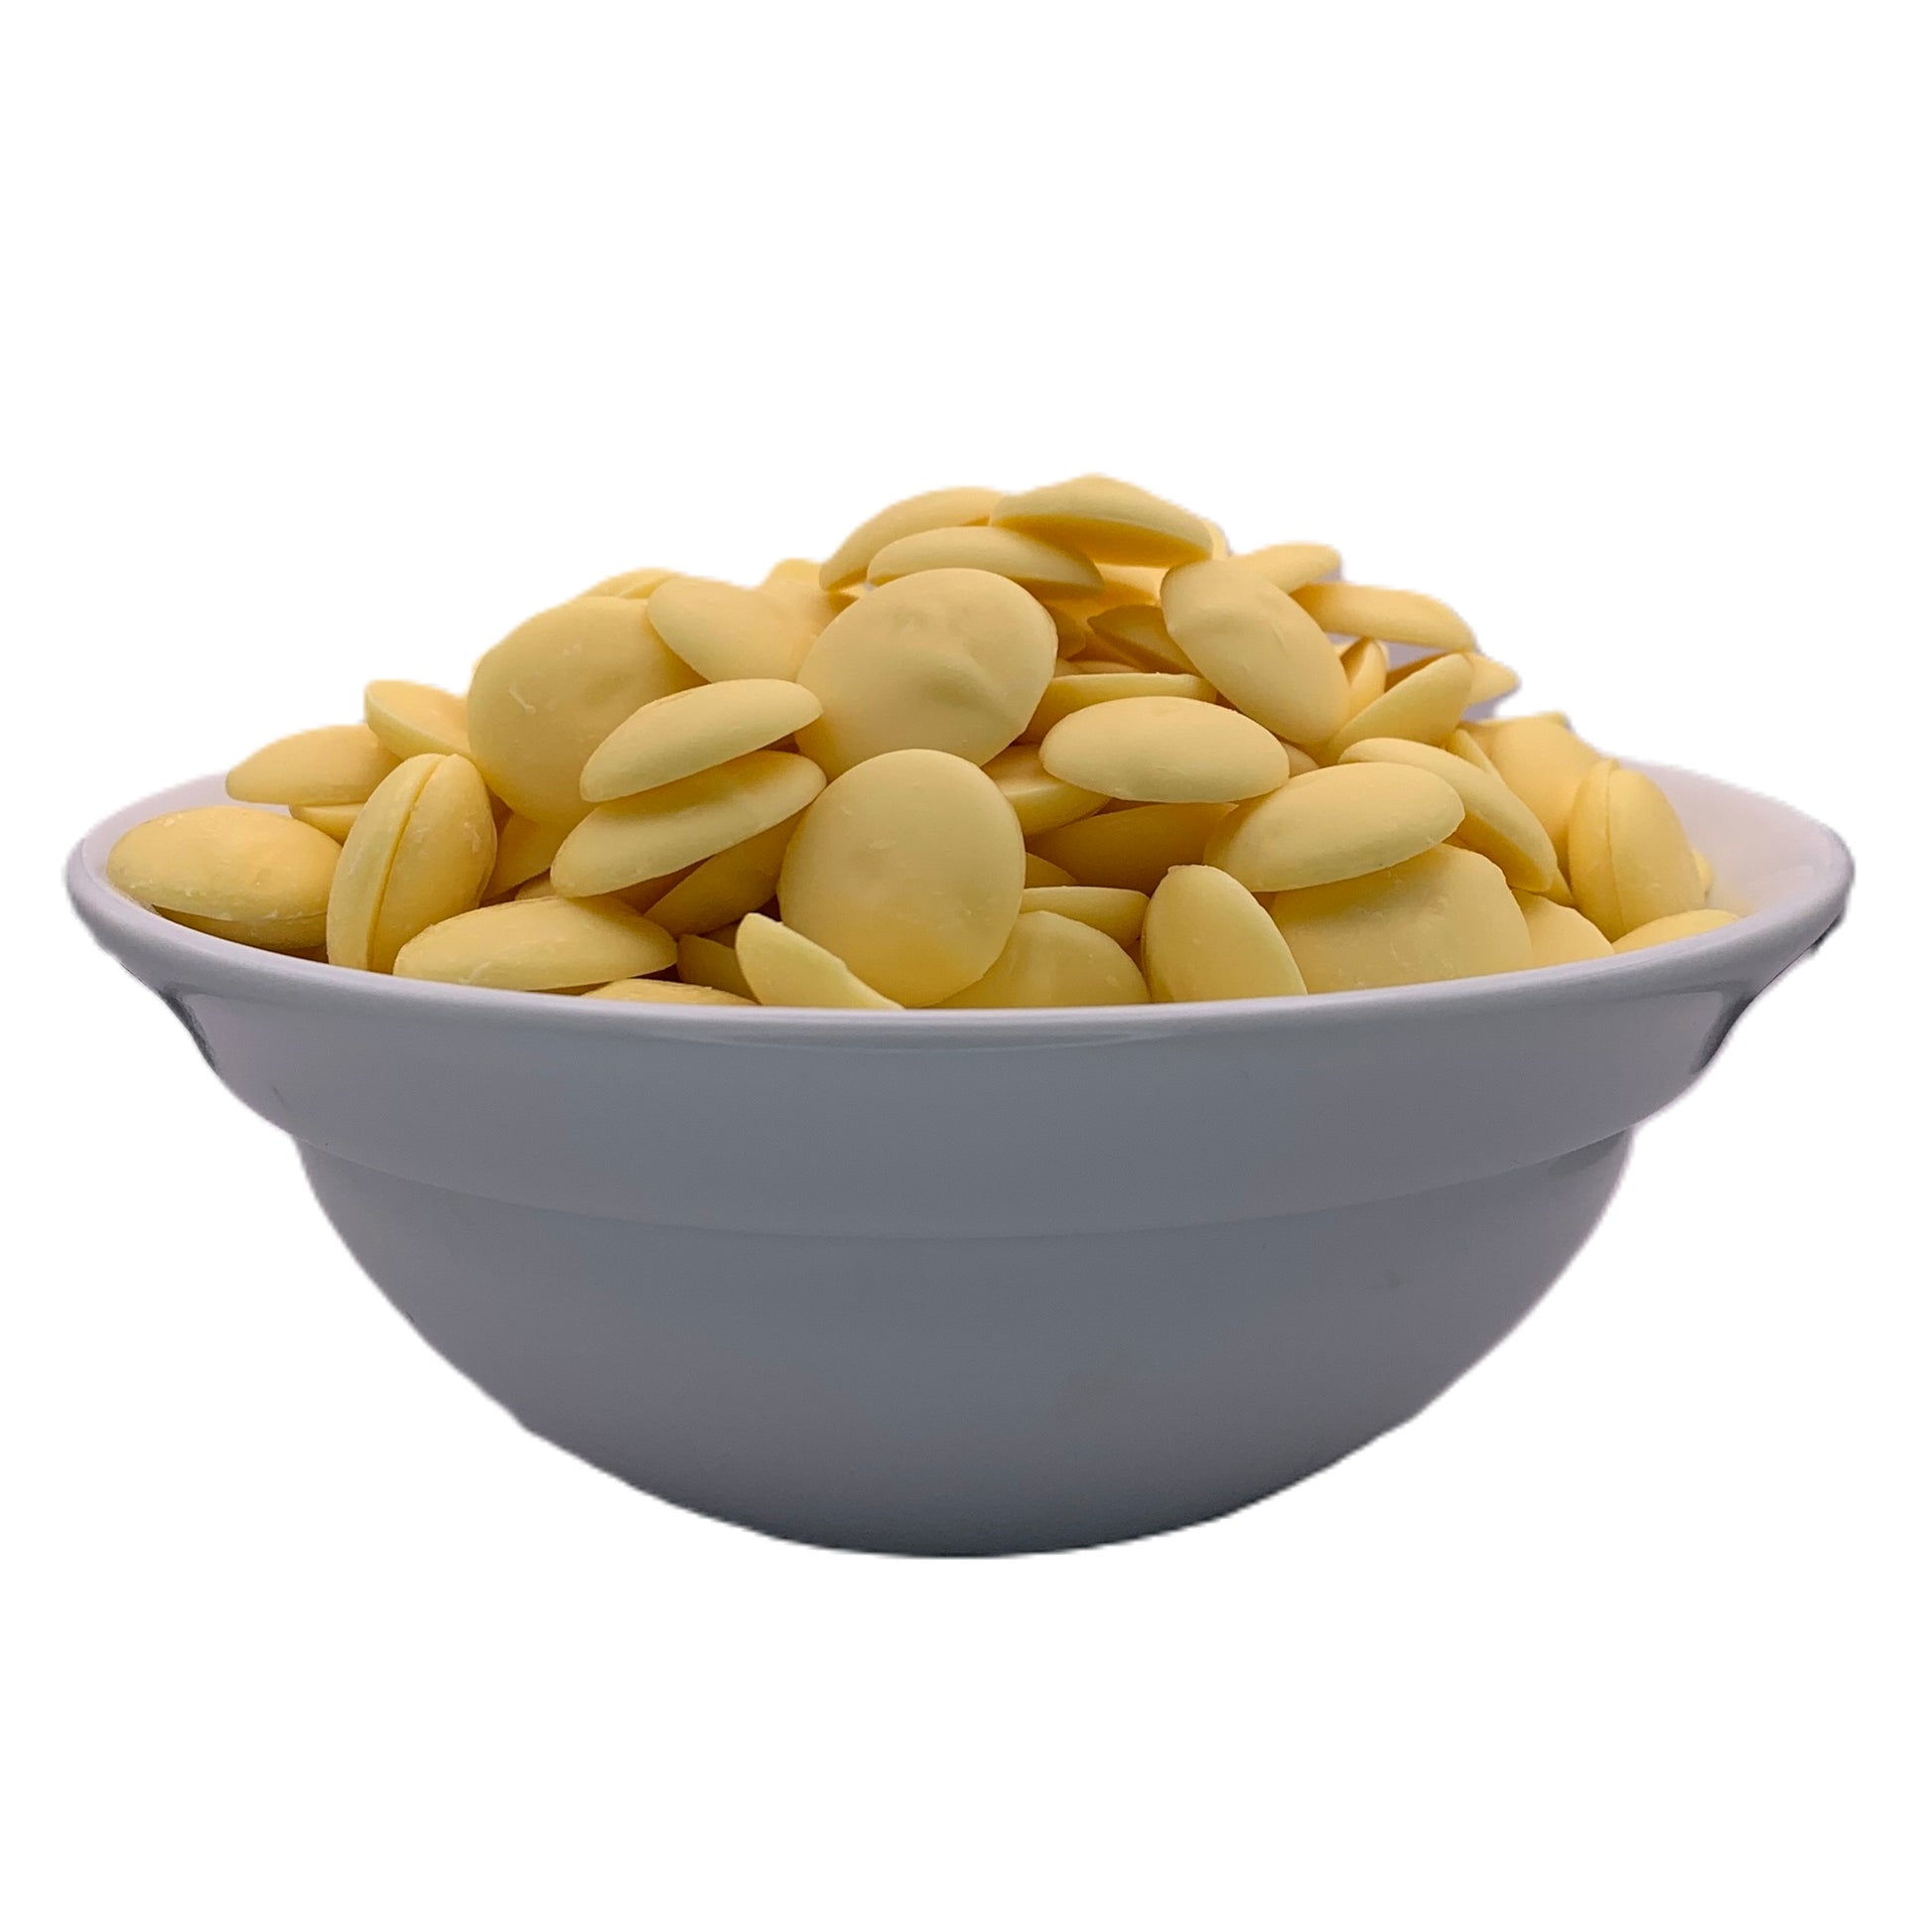 A bowl of Merckens yellow chocolate melting wafers displayed from a side angle, highlighting the soft pastel yellow shade ideal for spring-themed desserts or as a cheerful decoration for baked goods.